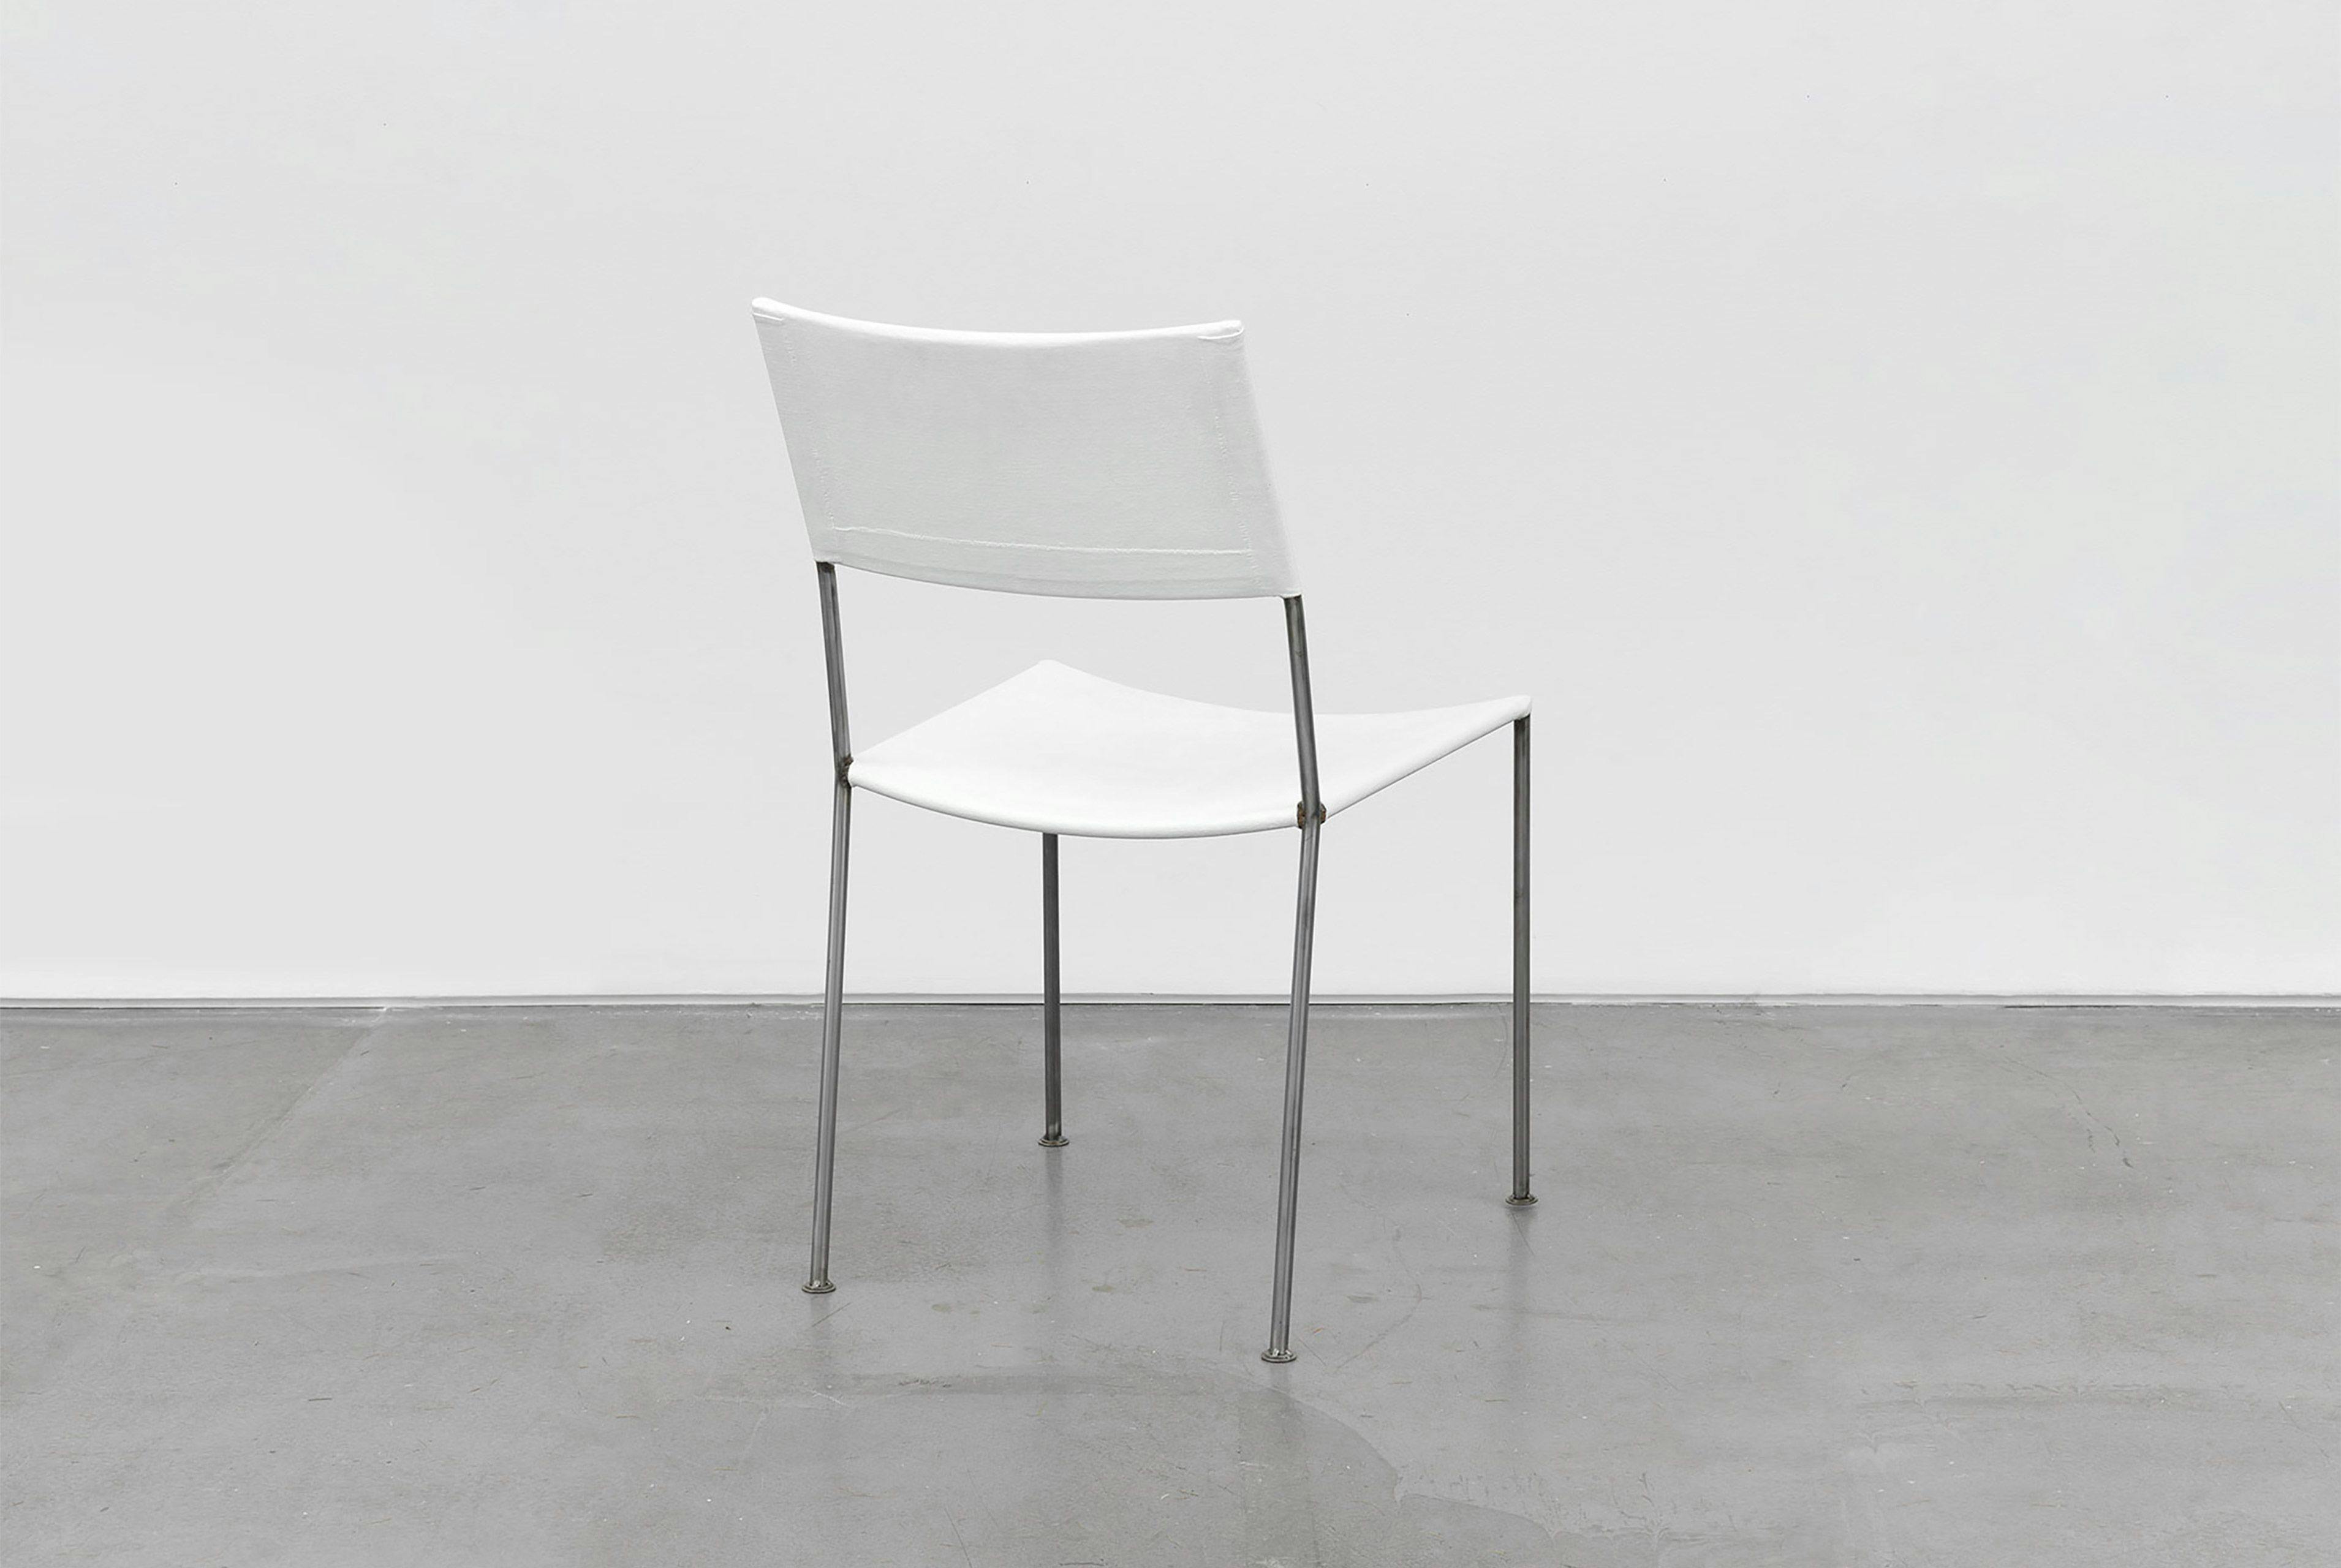 A furniture work by Franz West, titled Textilstuhl (Textile Chair), dated 2012/2015